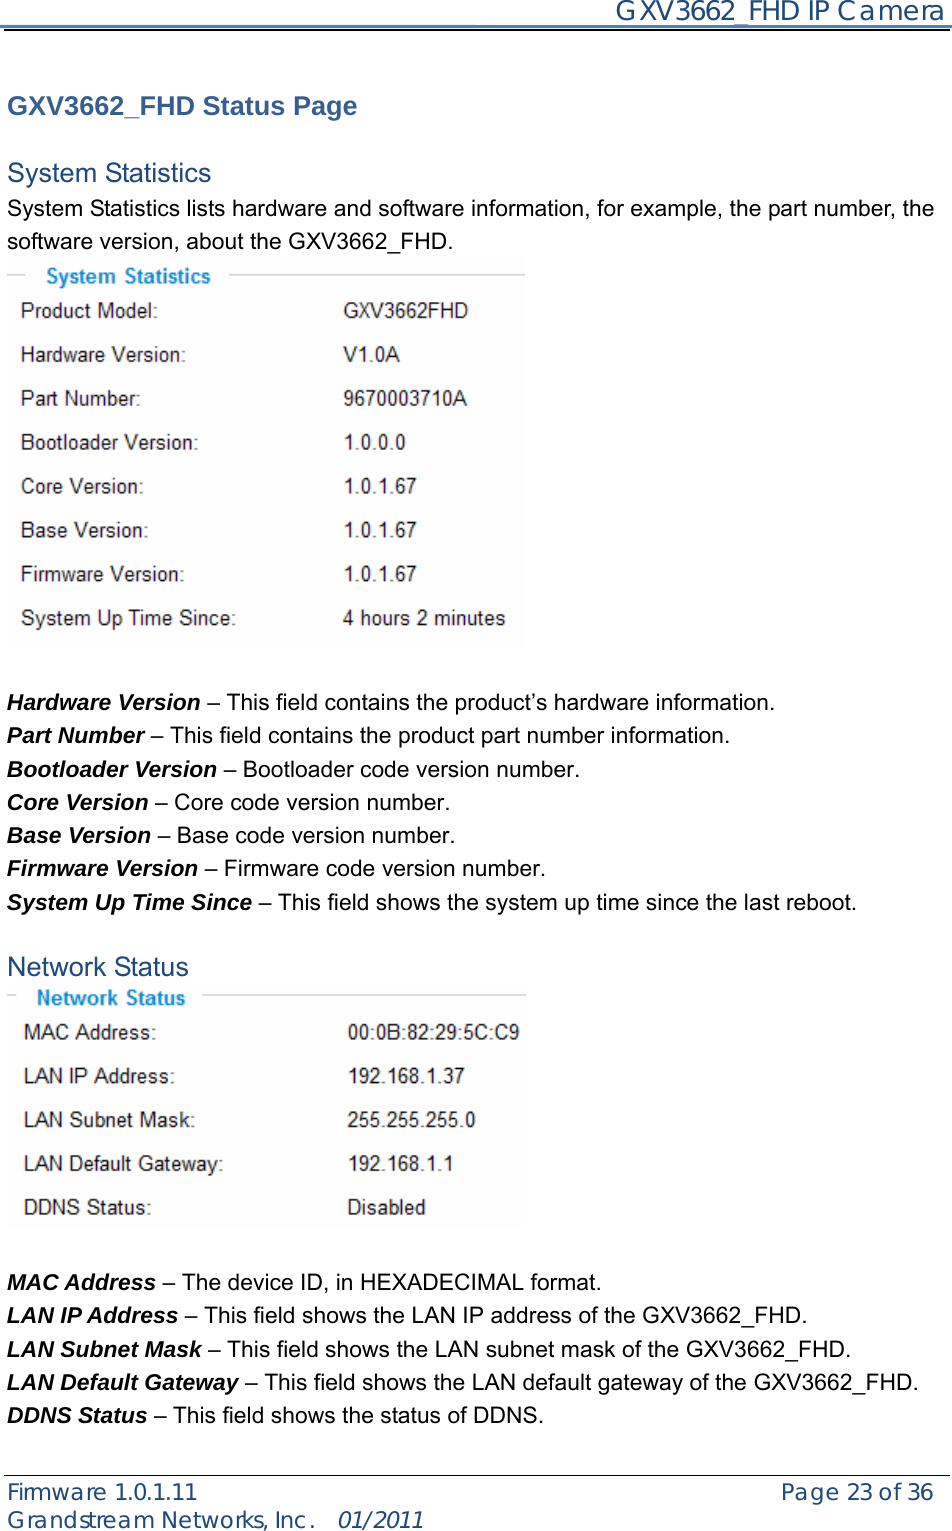     GXV3662_FHD IP Camera Firmware 1.0.1.11                                                   Page 23 of 36     Grandstream Networks, Inc.  01/2011   GXV3662_FHD Status Page  System Statistics   System Statistics lists hardware and software information, for example, the part number, the software version, about the GXV3662_FHD.   Hardware Version – This field contains the product’s hardware information.   Part Number – This field contains the product part number information. Bootloader Version – Bootloader code version number. Core Version – Core code version number. Base Version – Base code version number. Firmware Version – Firmware code version number. System Up Time Since – This field shows the system up time since the last reboot.  Network Status   MAC Address – The device ID, in HEXADECIMAL format. LAN IP Address – This field shows the LAN IP address of the GXV3662_FHD. LAN Subnet Mask – This field shows the LAN subnet mask of the GXV3662_FHD. LAN Default Gateway – This field shows the LAN default gateway of the GXV3662_FHD. DDNS Status – This field shows the status of DDNS.  